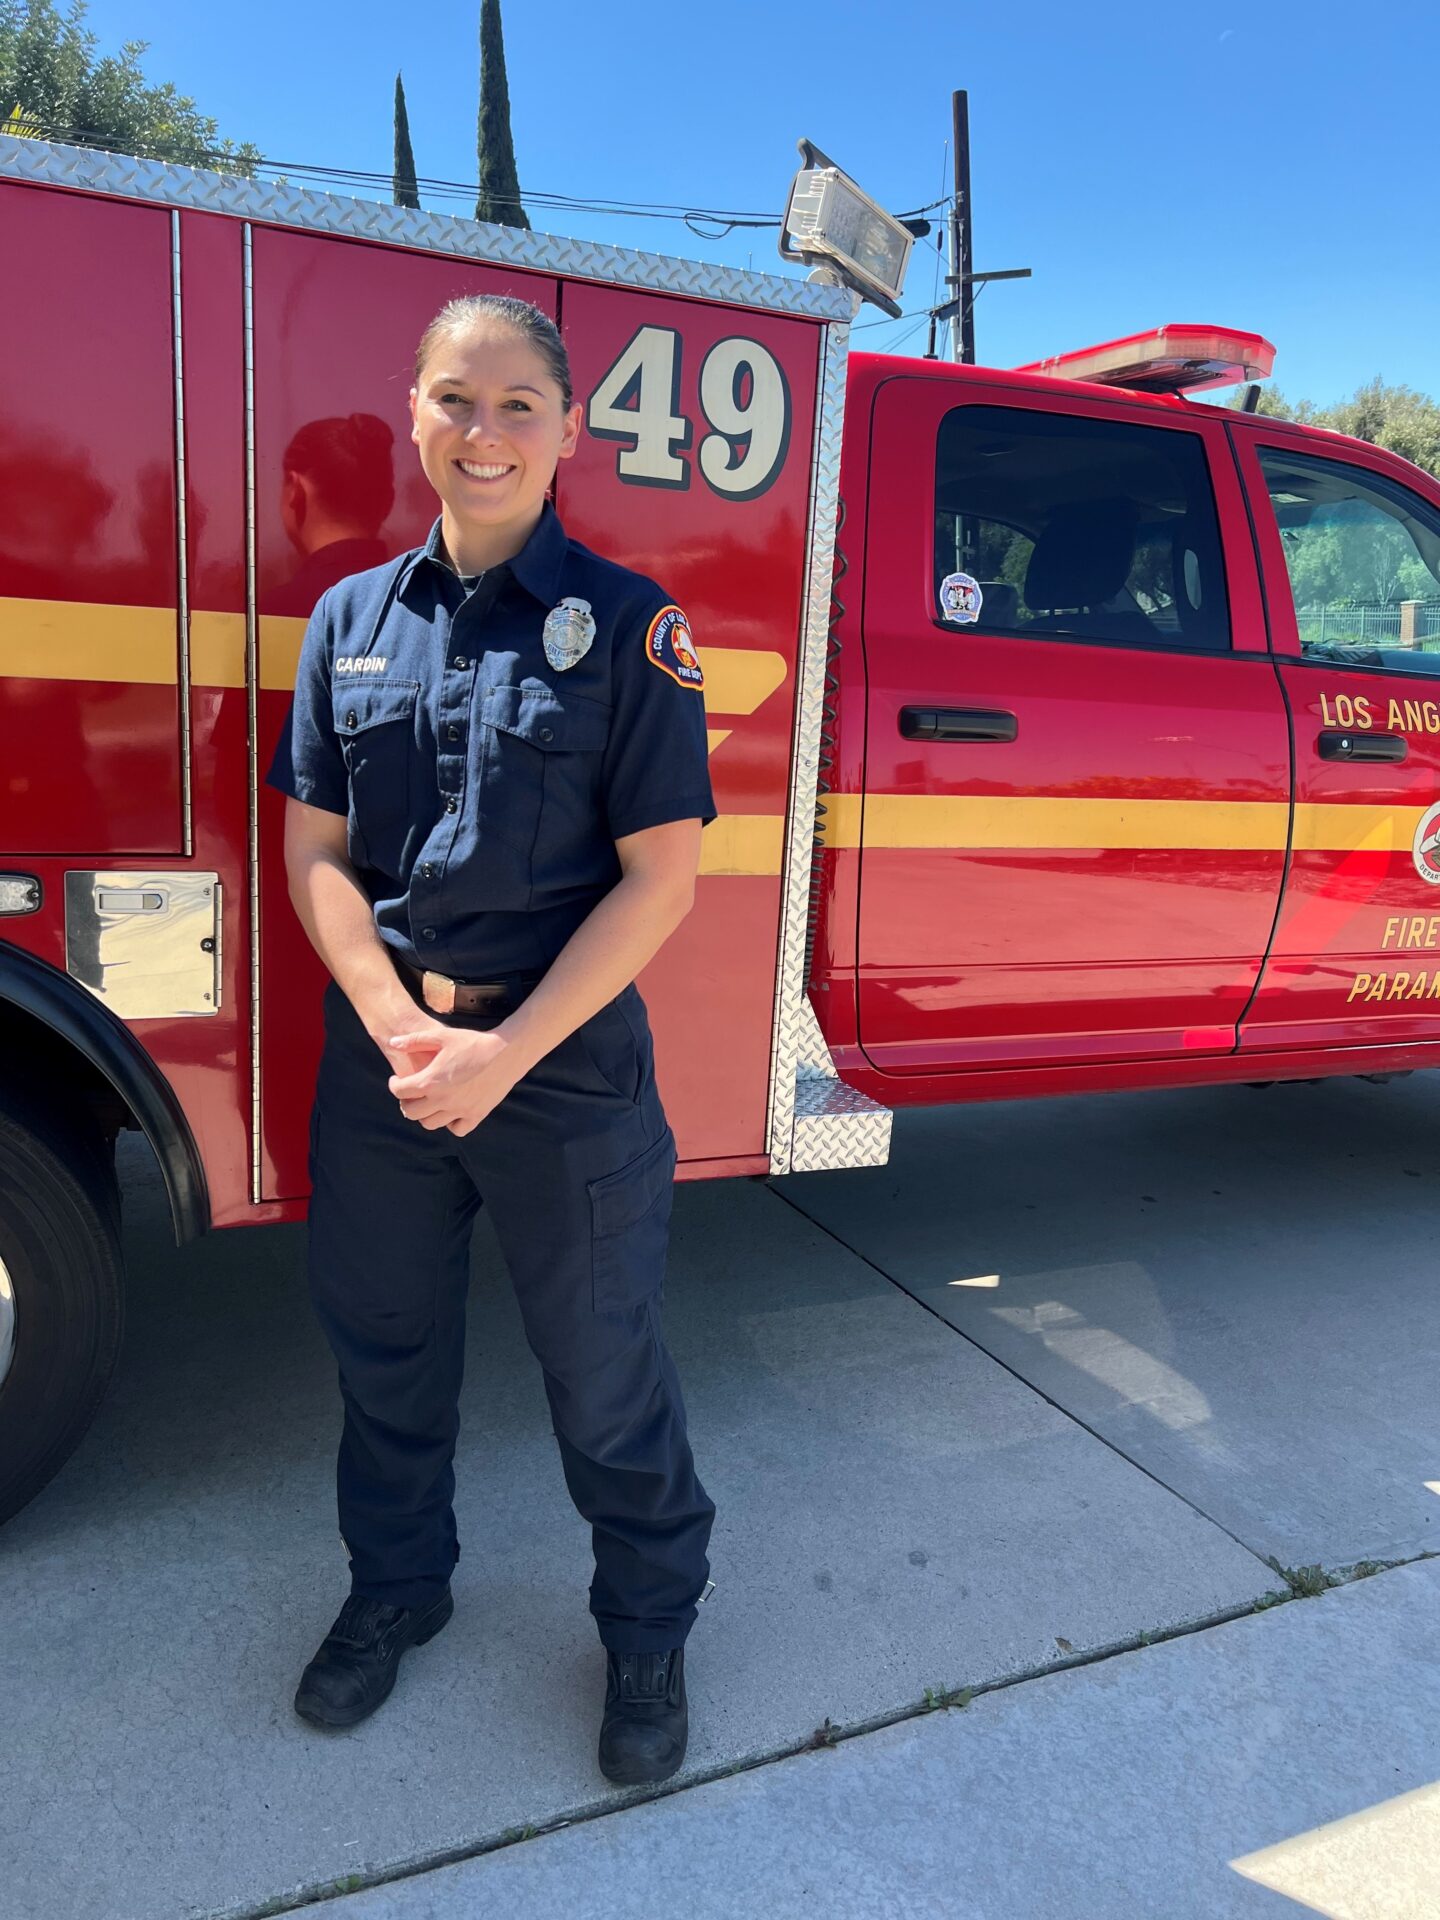 County of Los Angeles Fire Department Fire Fighter Paramedic (FFPM) Lauren Cardin was recently recognized by the Children’s Hospital of Orange County (CHOC) for her exemplary efforts during an emergency medical services (EMS) response involving a pediatric patient.